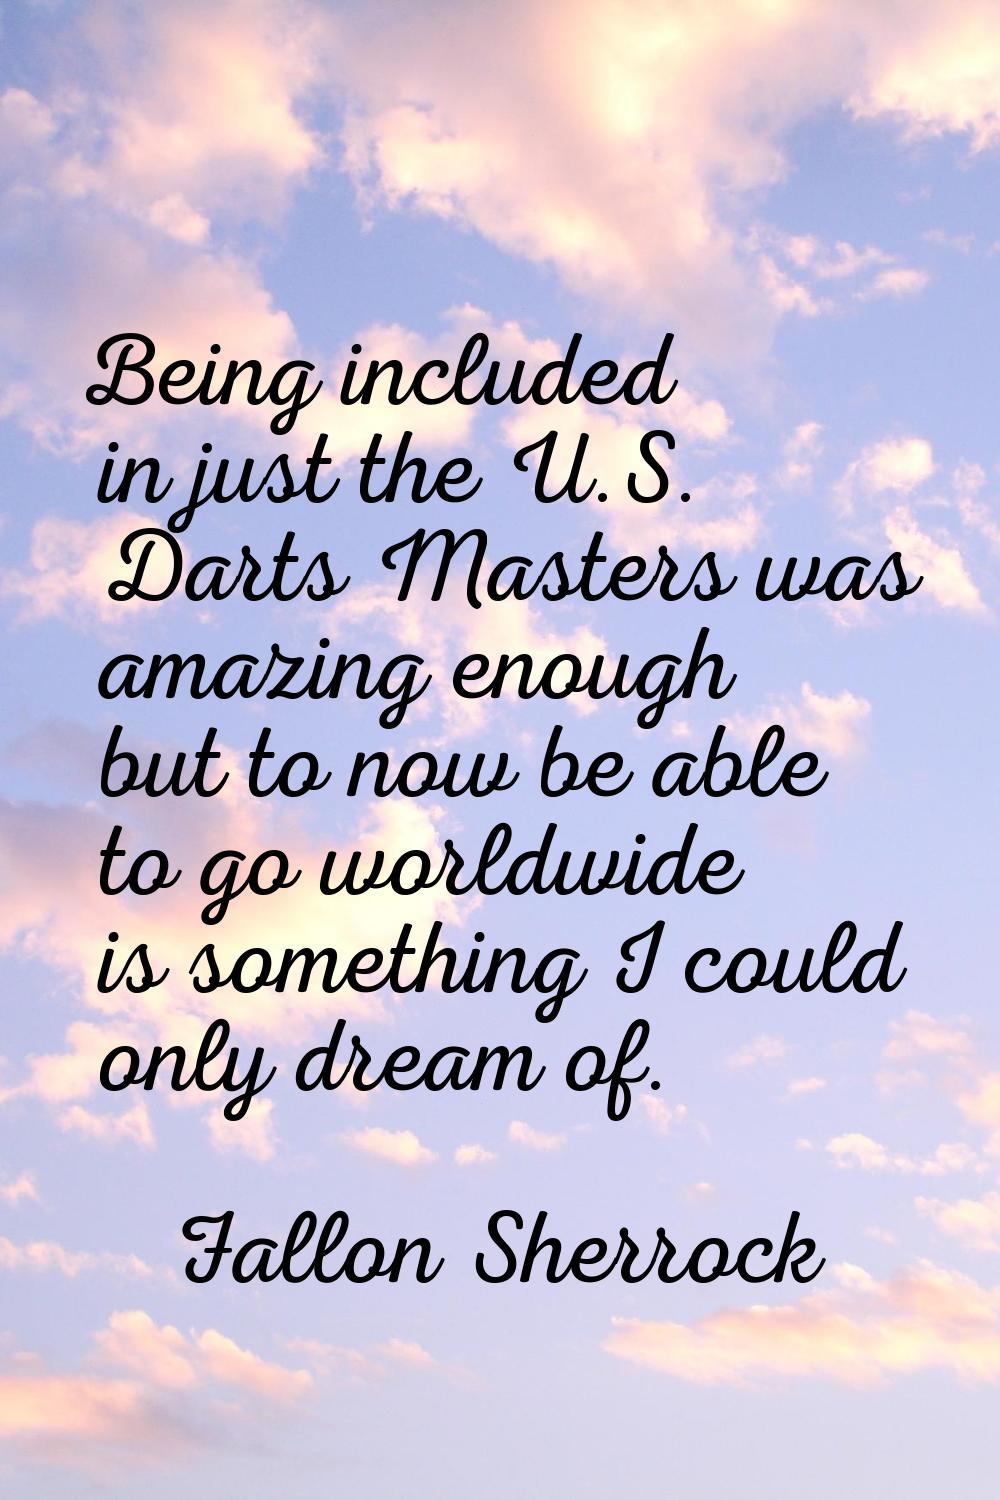 Being included in just the U.S. Darts Masters was amazing enough but to now be able to go worldwide